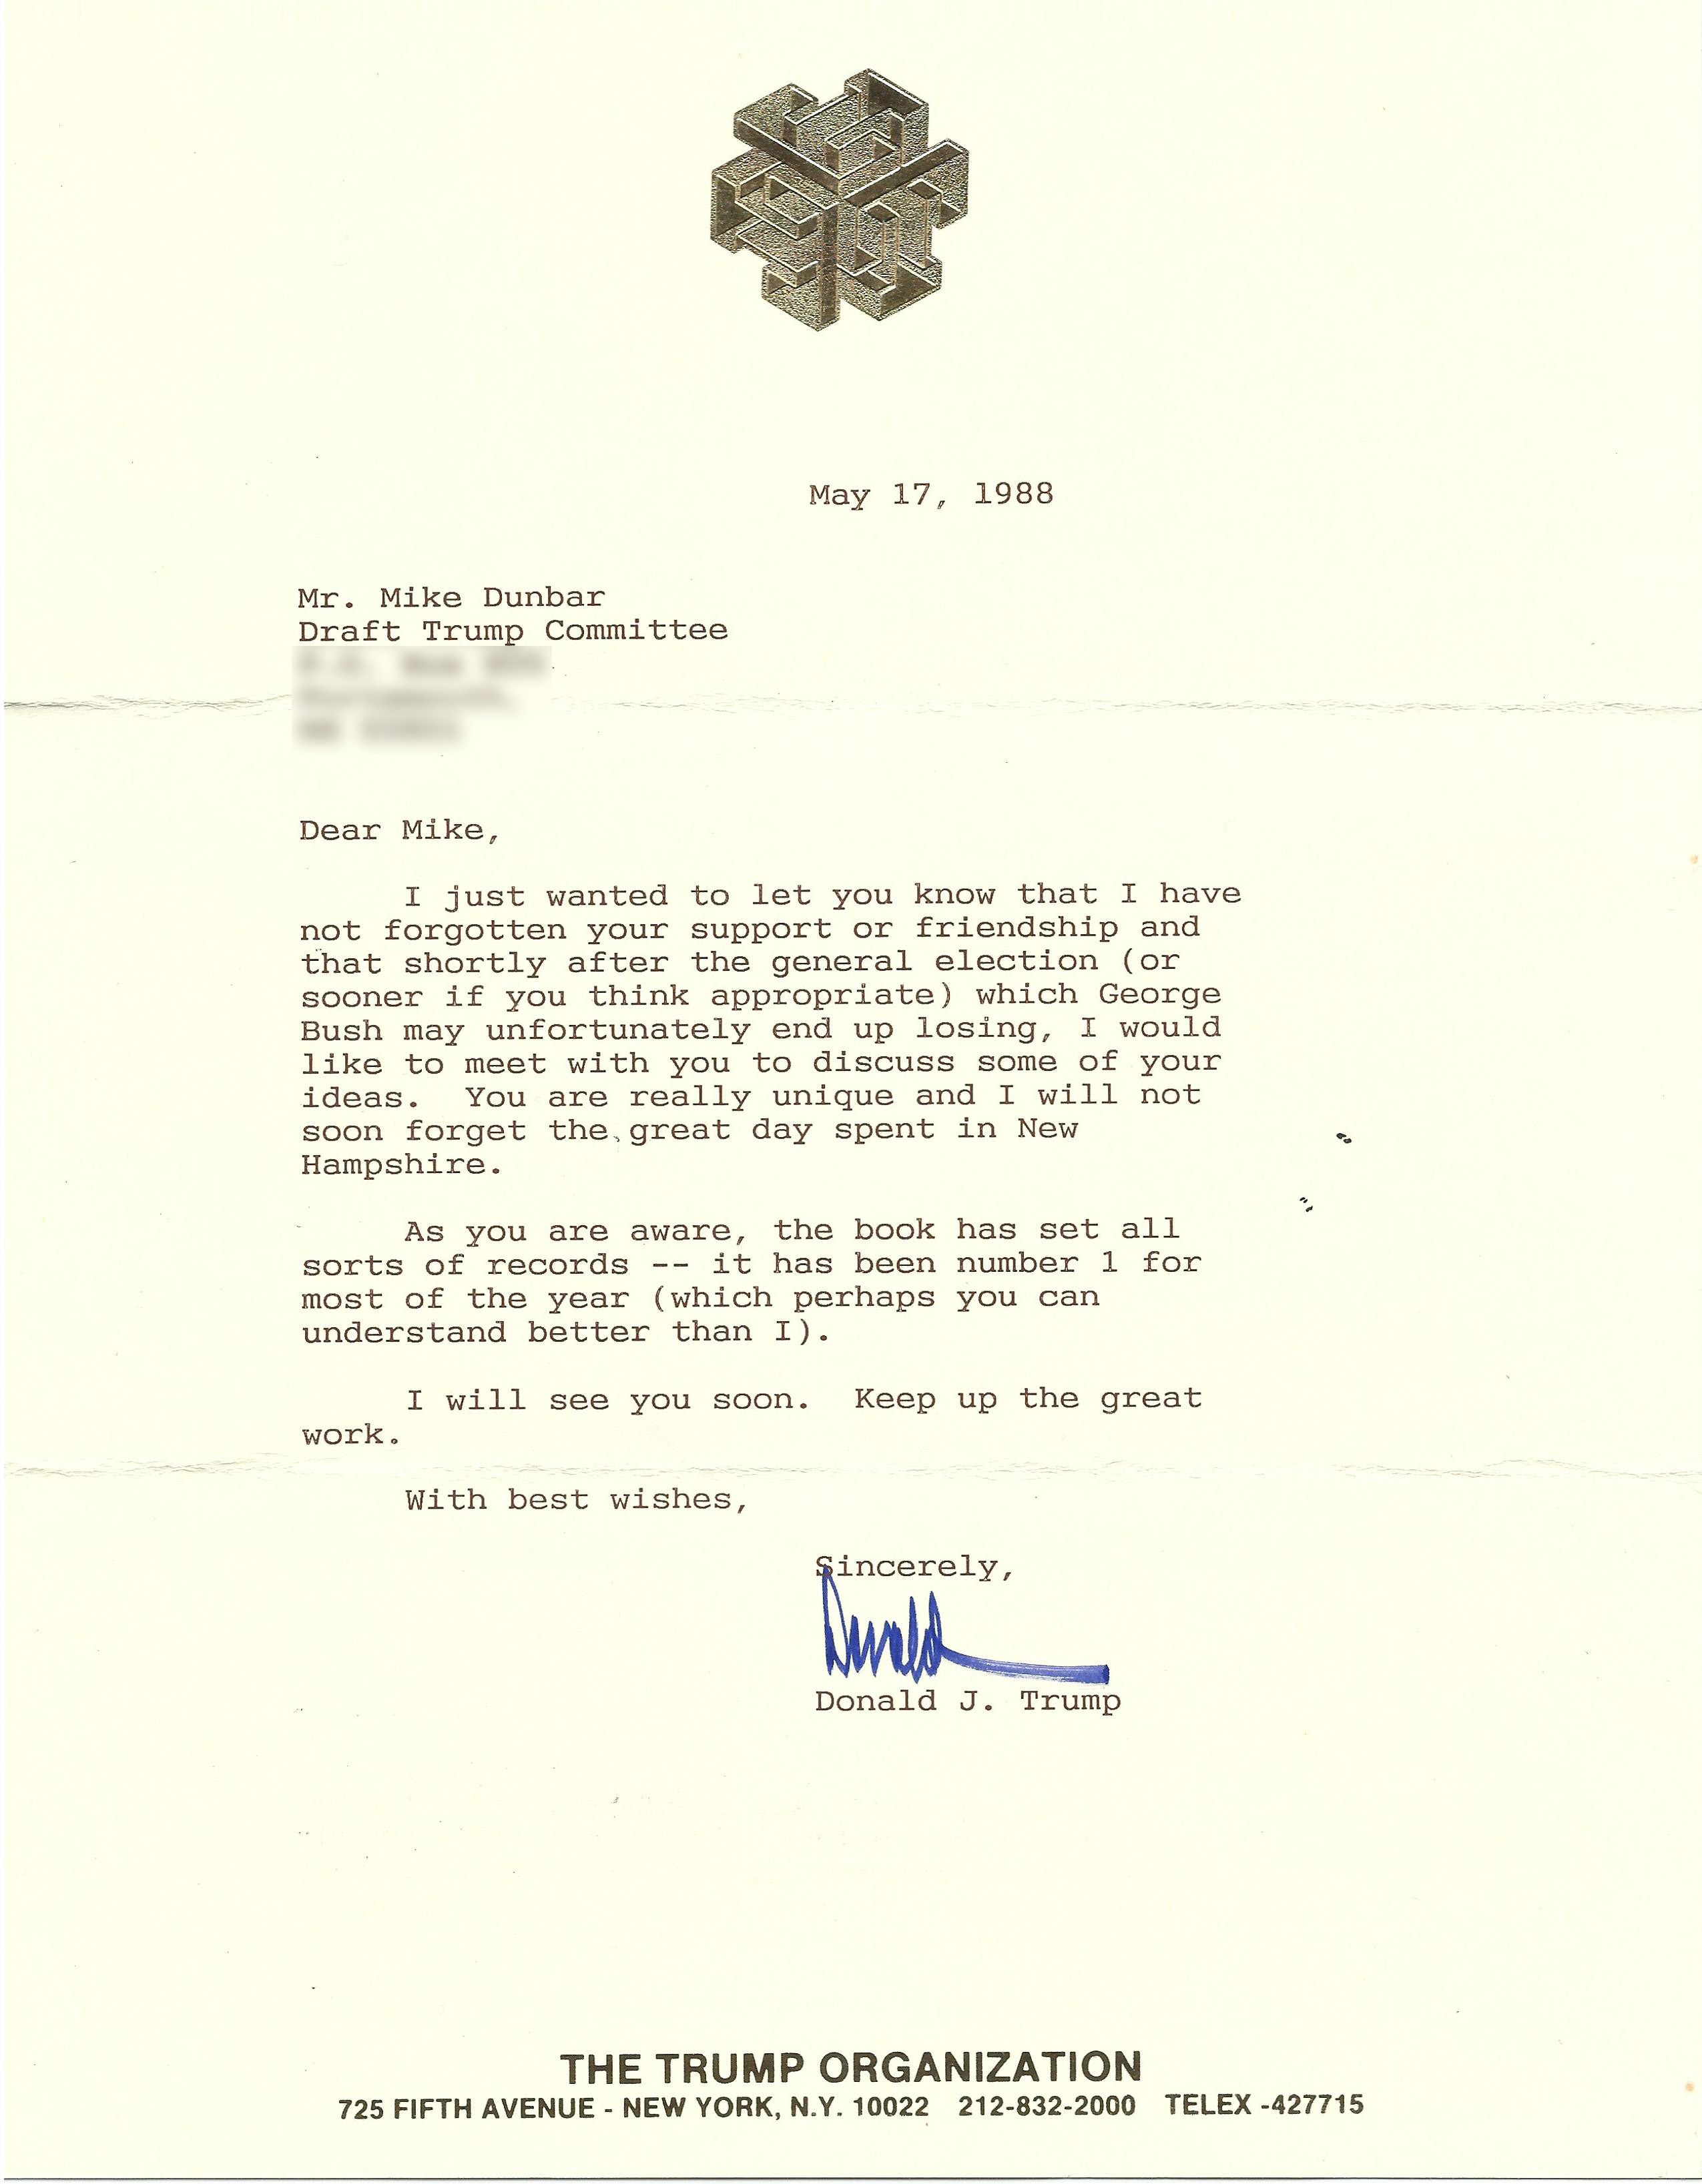 Signed letter to Mike Dunbar from Donald Trump, dated May 17, 1988 (Courtesy of Mike Dunbar)